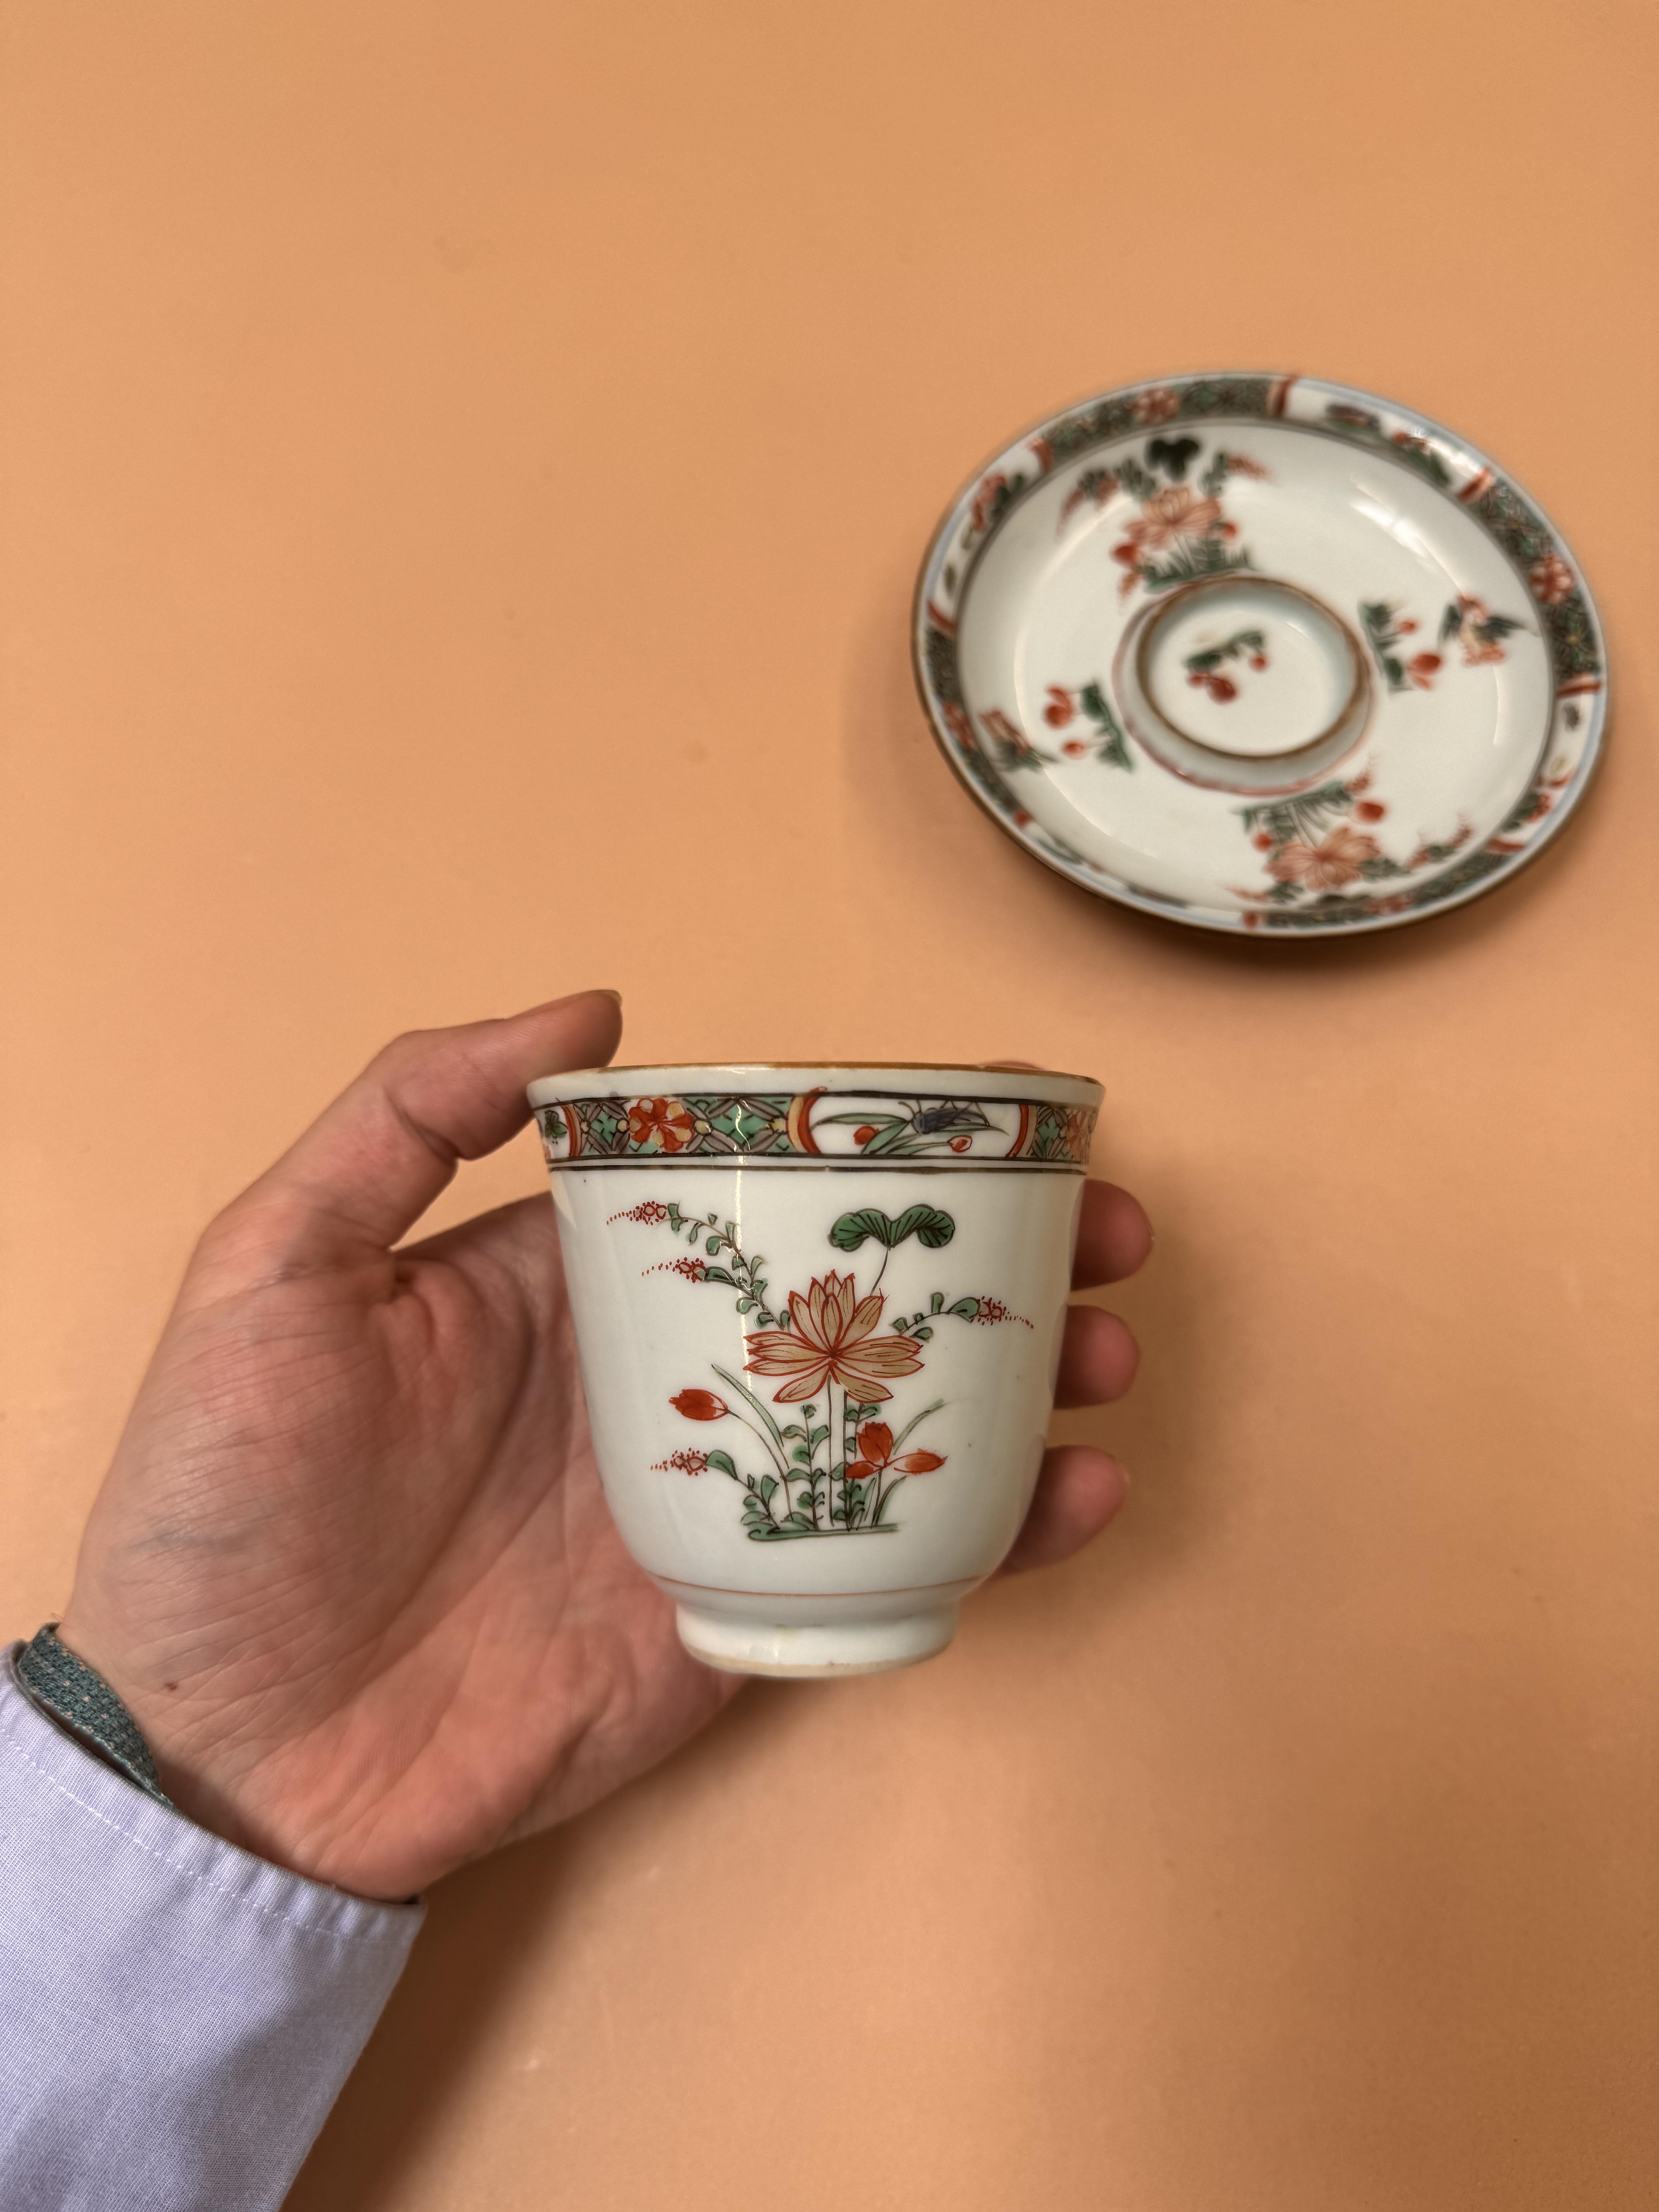 A CHINESE FAMILLE-VERTE CUP AND SAUCER 清康熙 五彩花鳥圖盃連盤 - Image 16 of 18